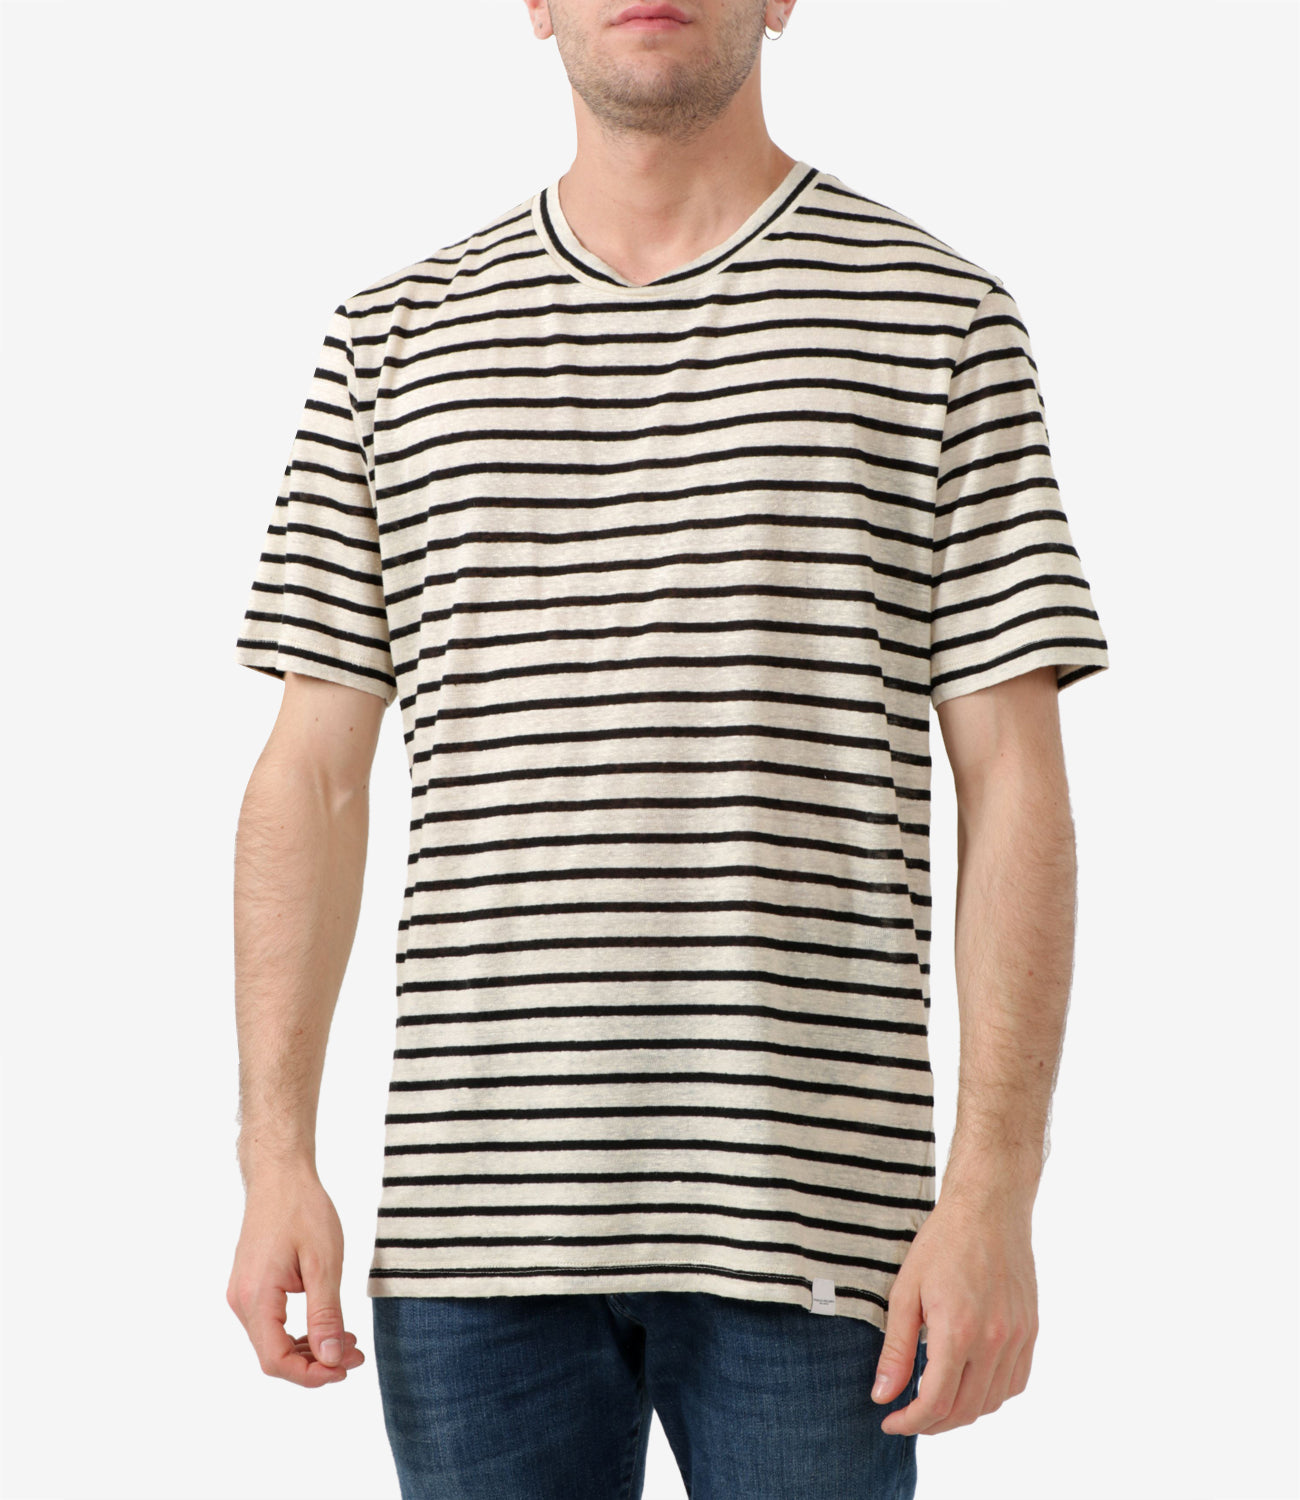 Paolo Pecora | T-Shirt Beige and Black